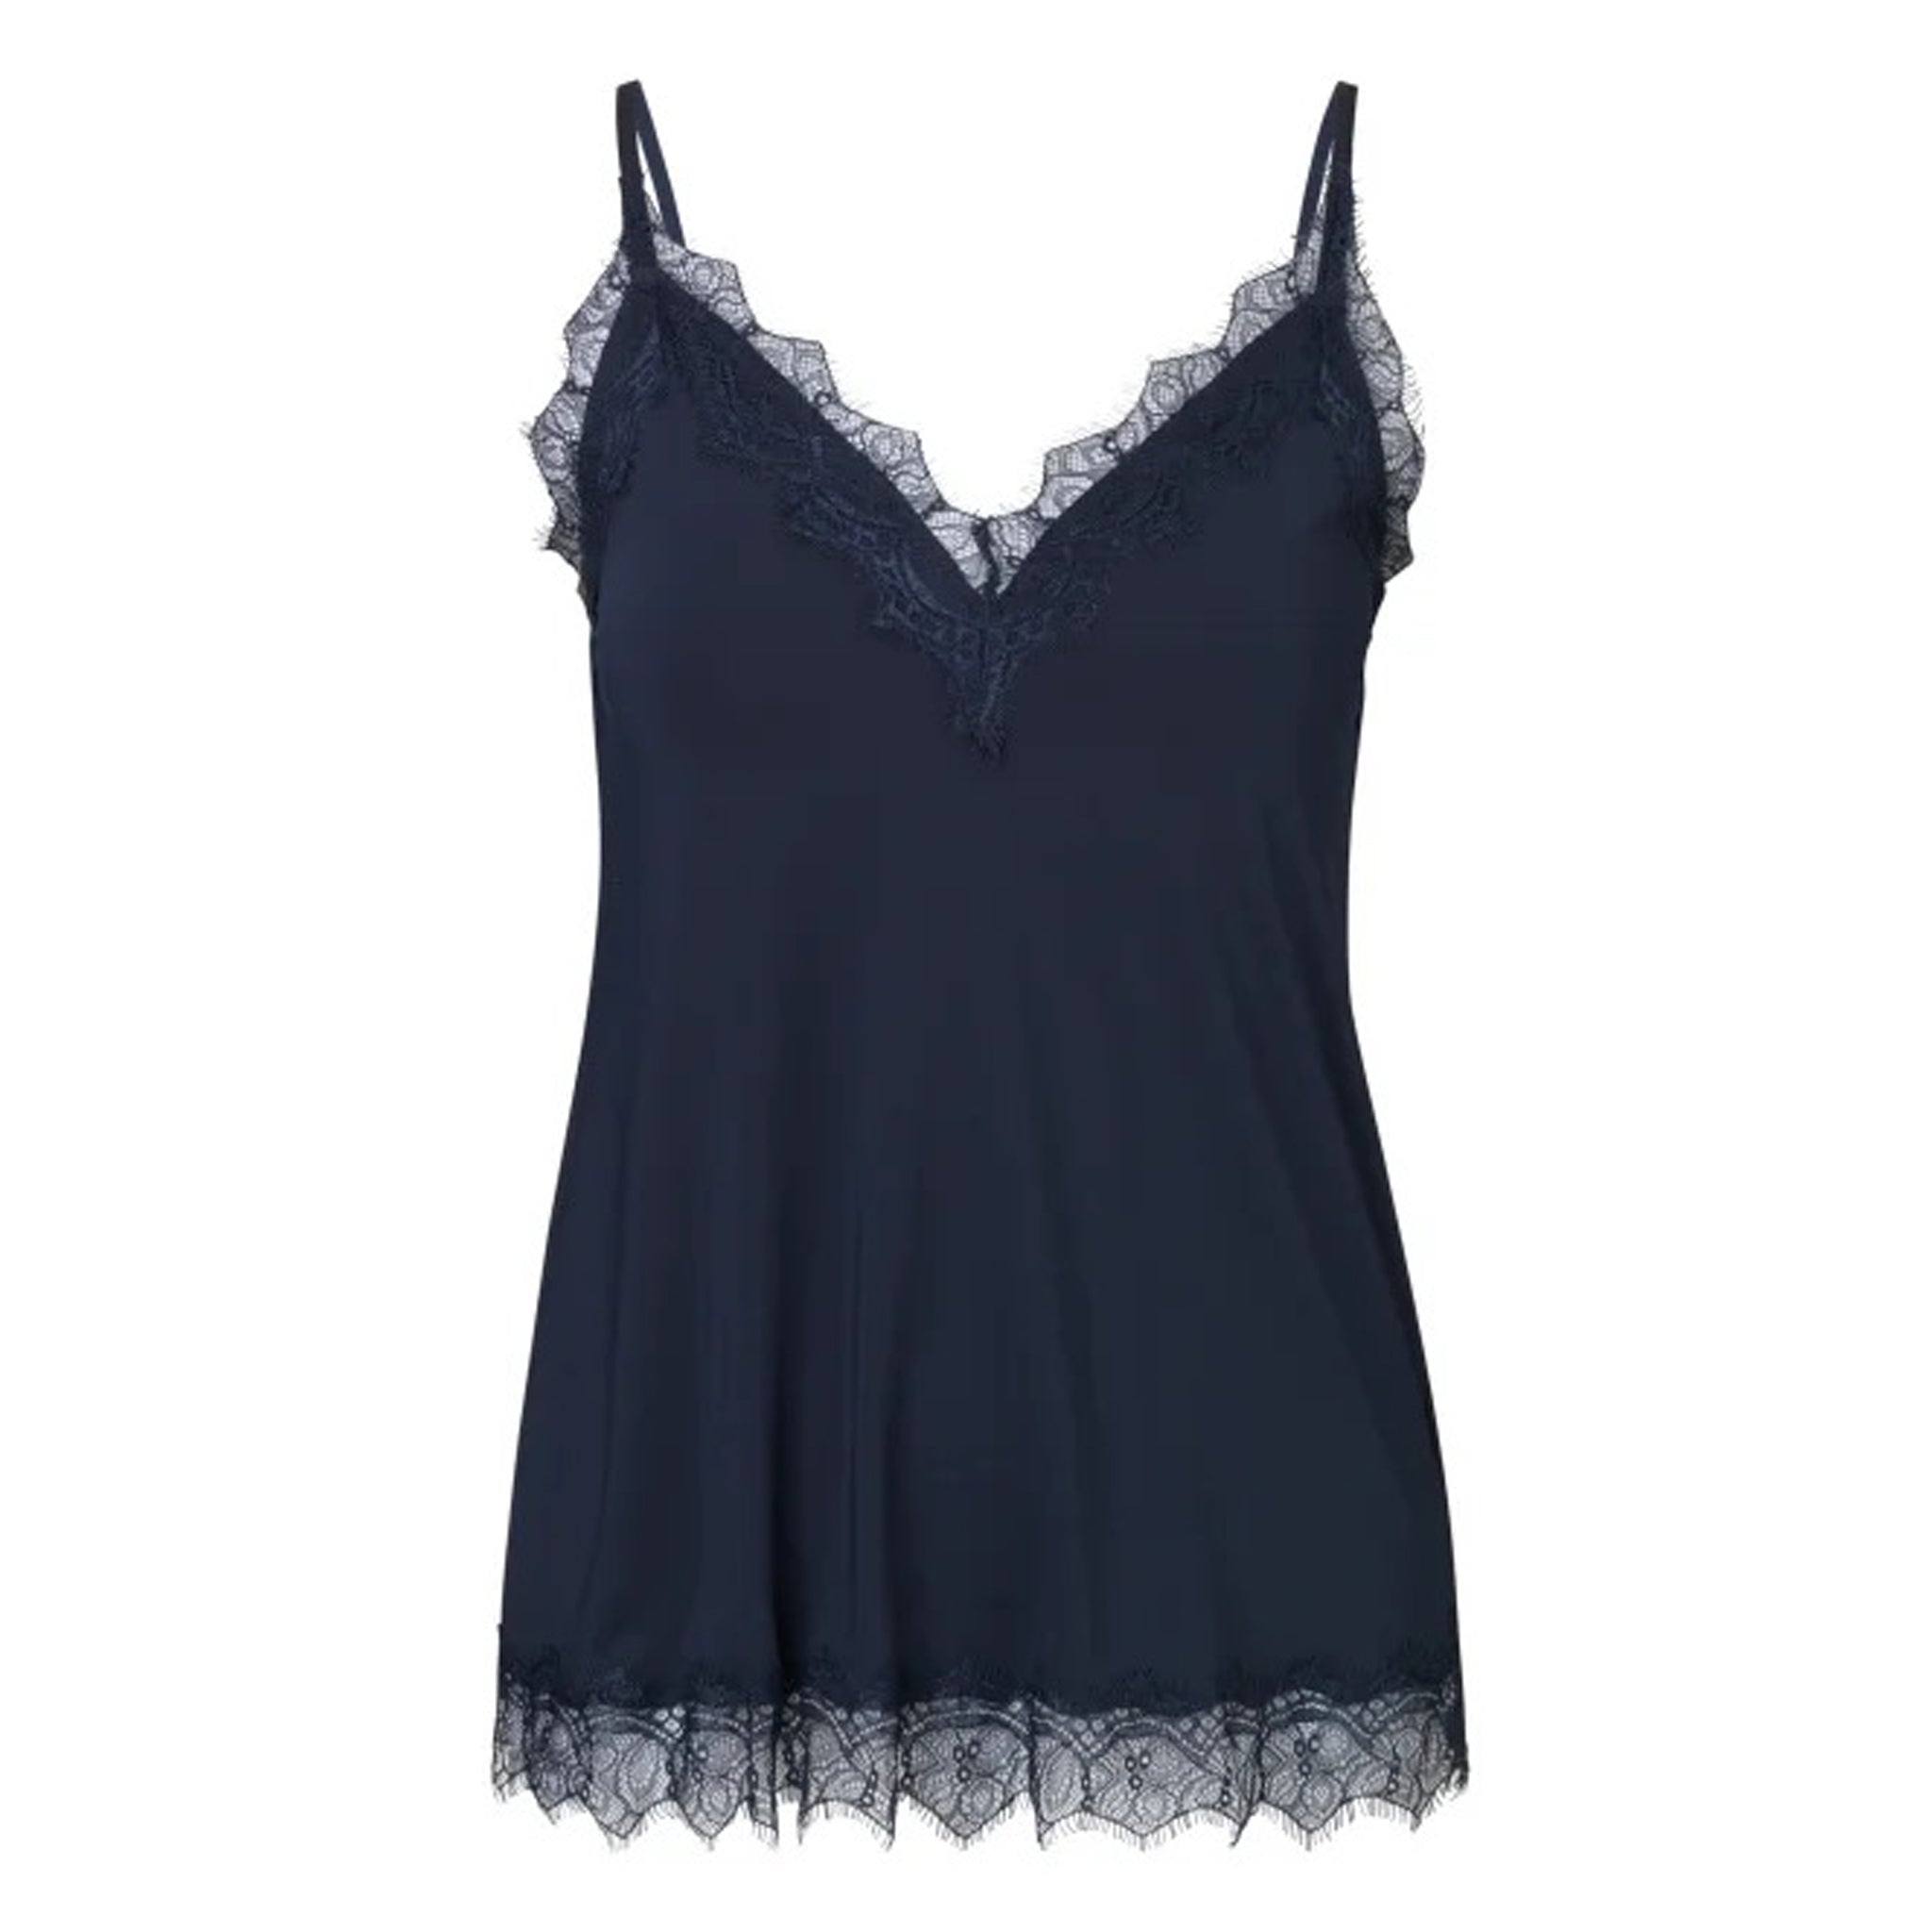 A Rosemunde Strap Lace Top in navy with lace detailing.